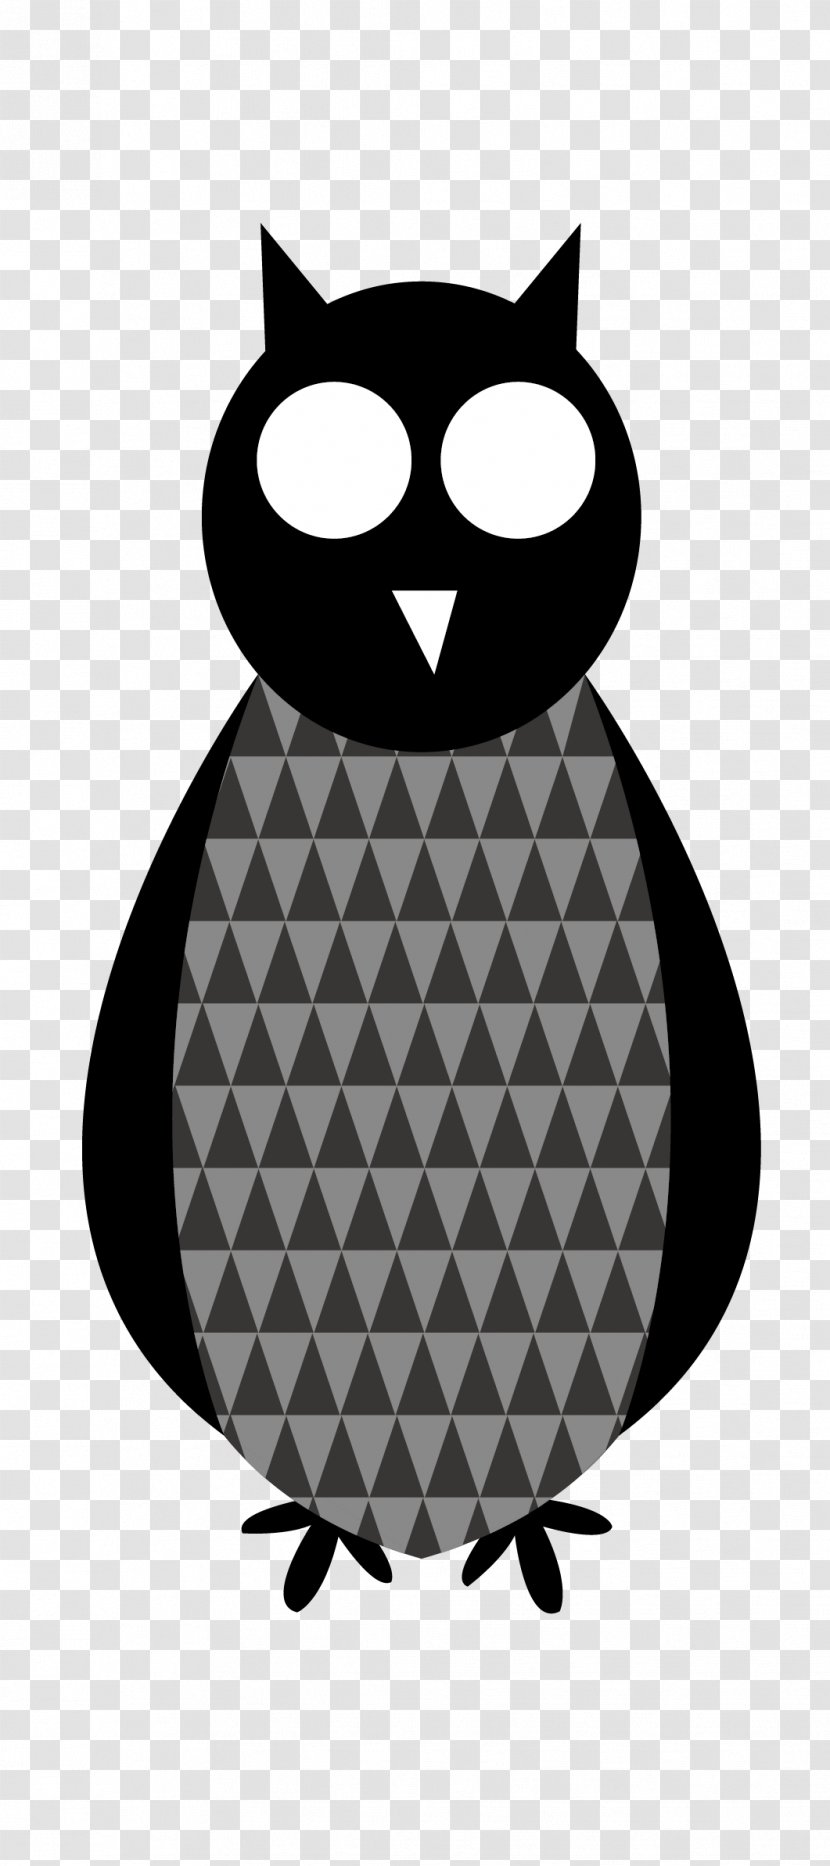 Owl Clothes - Illustration - Black And White Transparent PNG